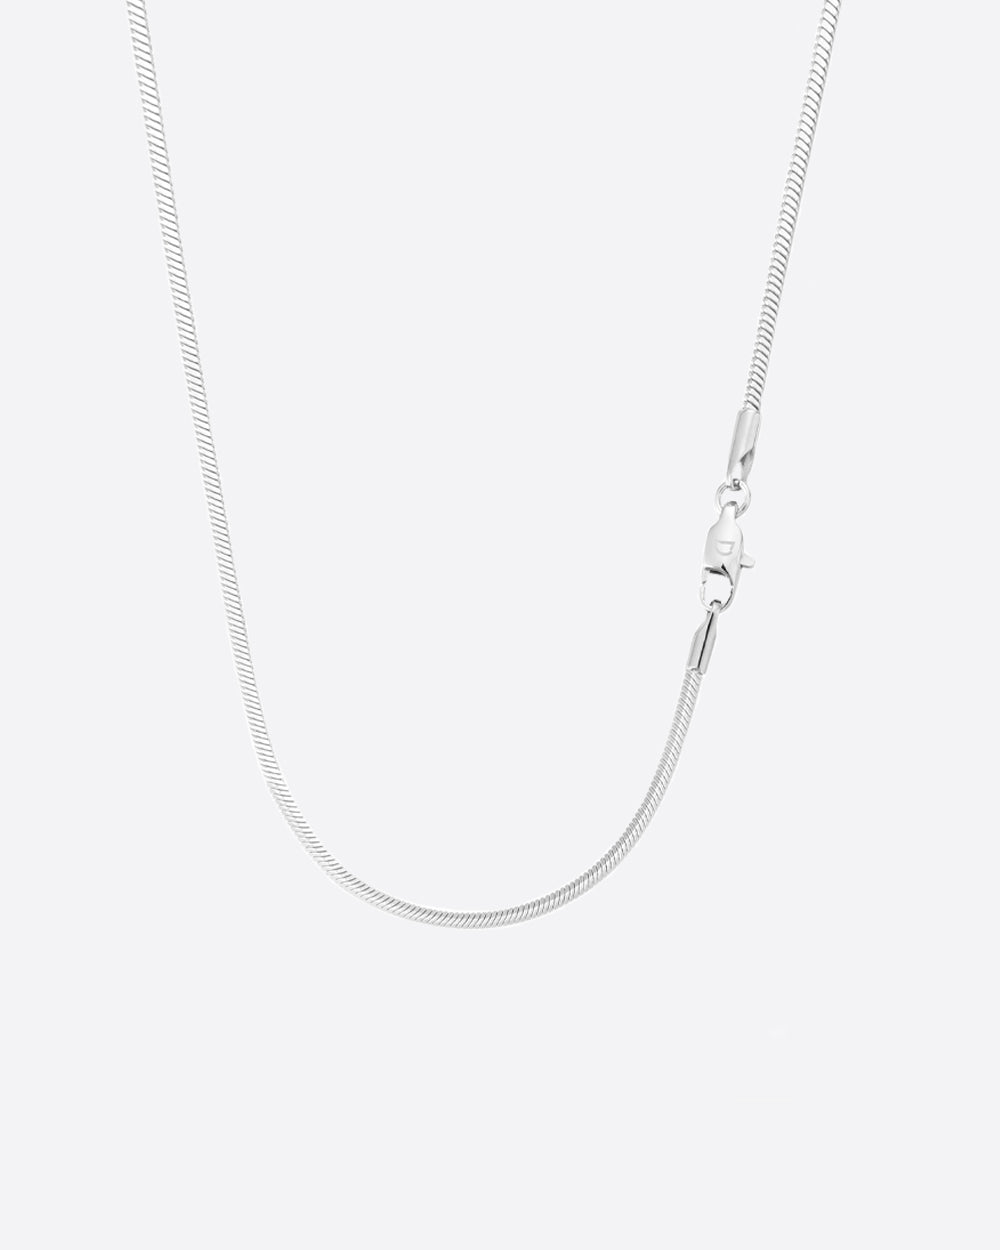 CLEAN SNAKE CHAIN. - 2MM WHITE GOLD